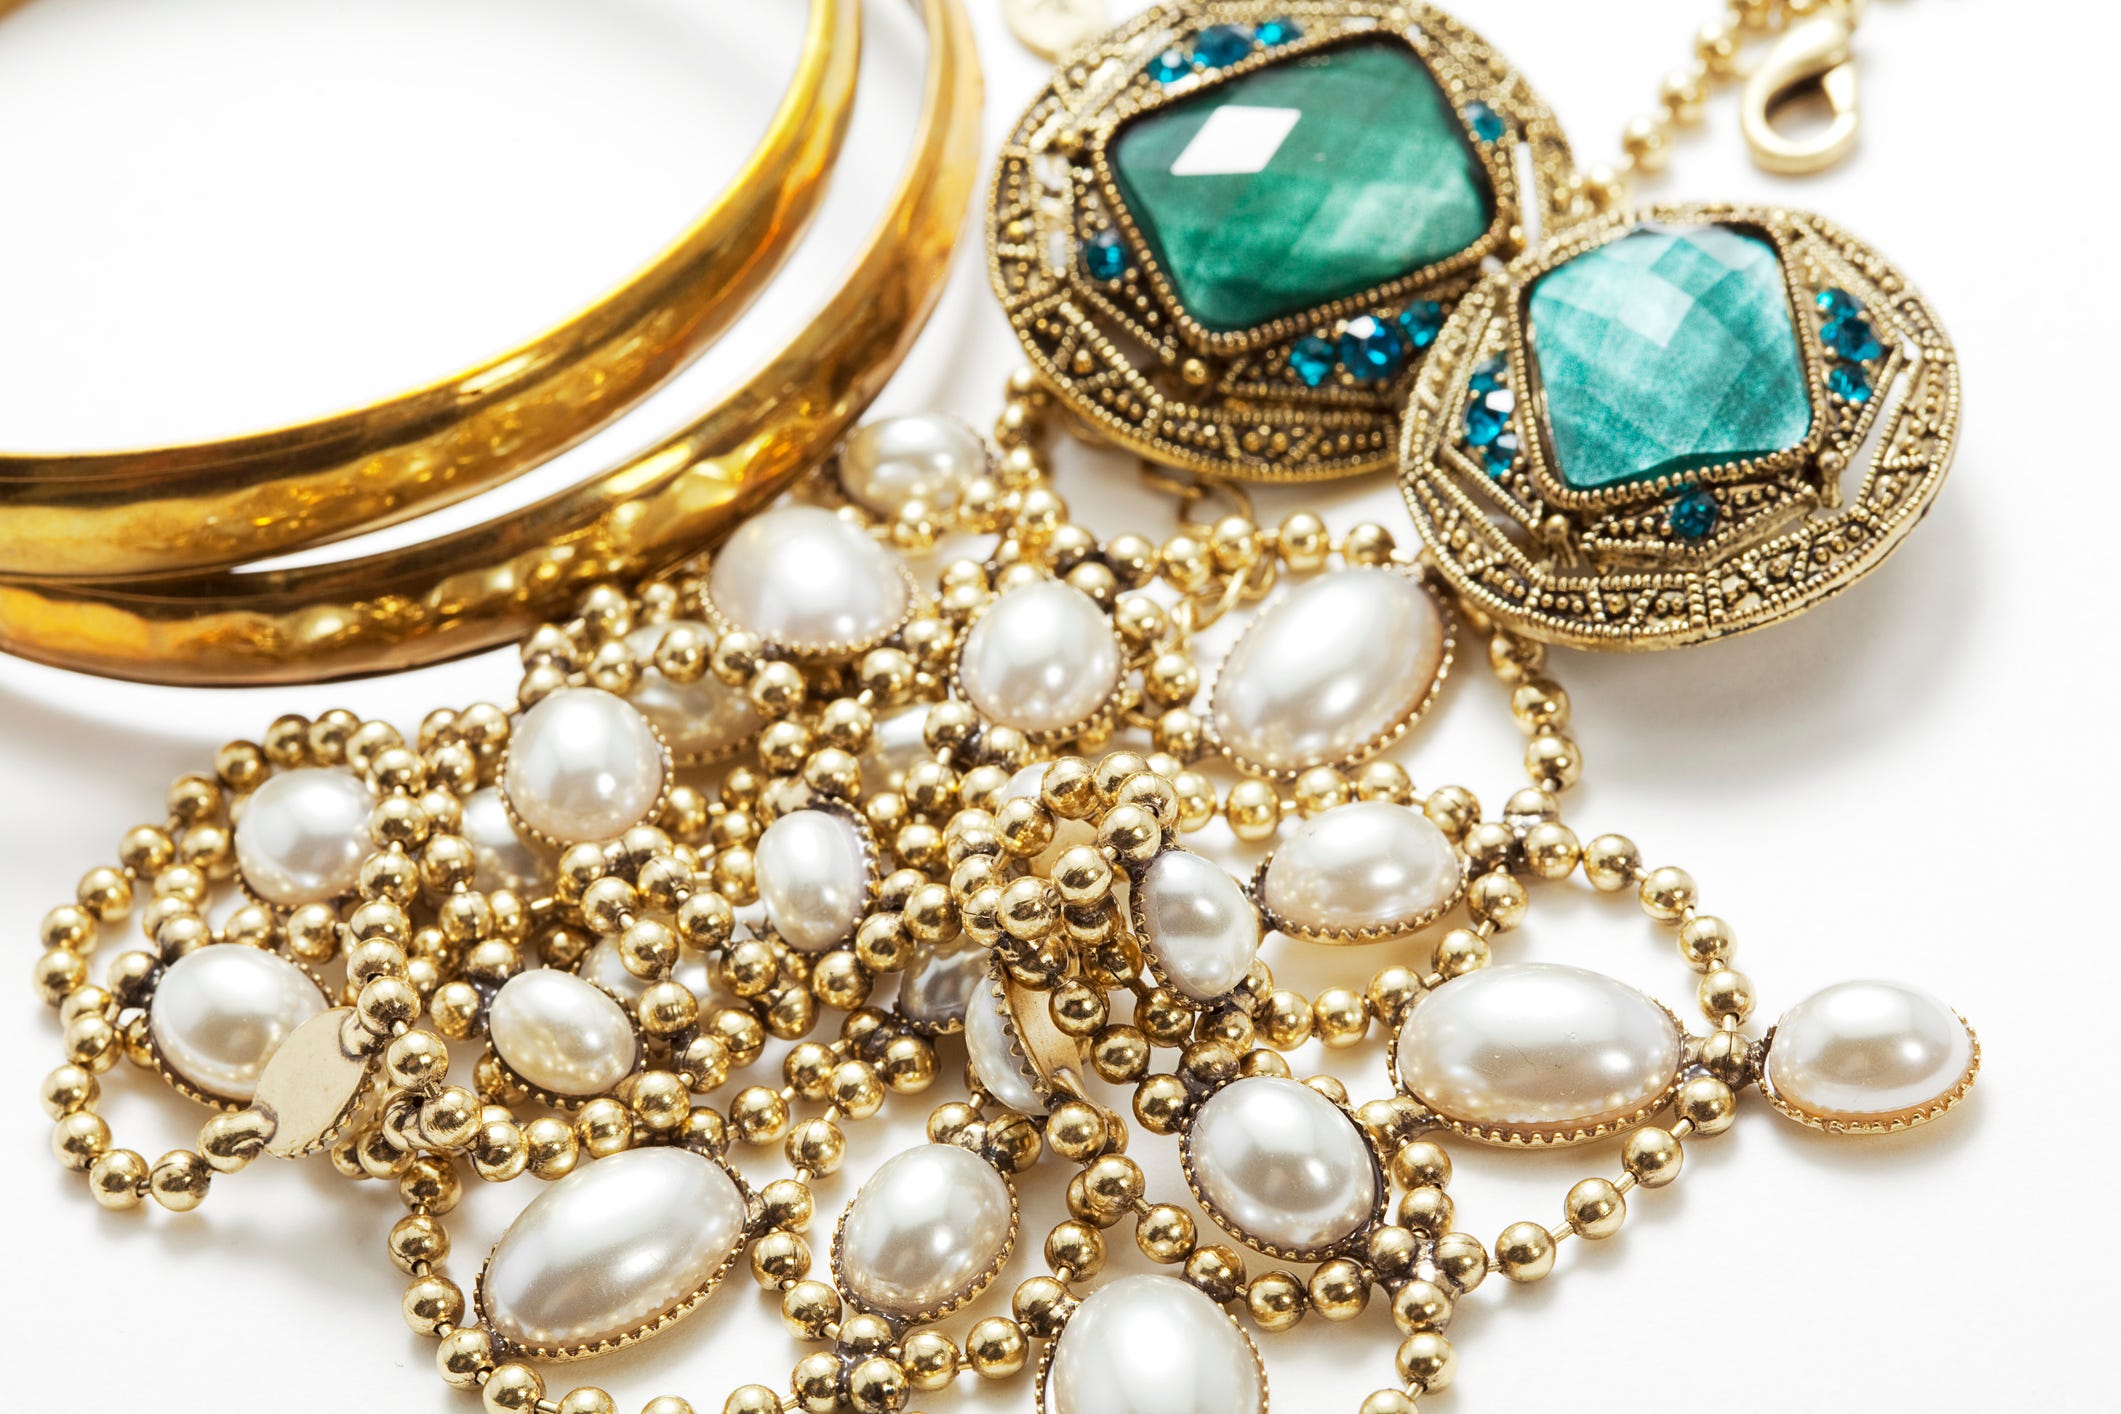 How to Identify Antique and Vintage Jewelry That Will Only Get More Valuable Over Time